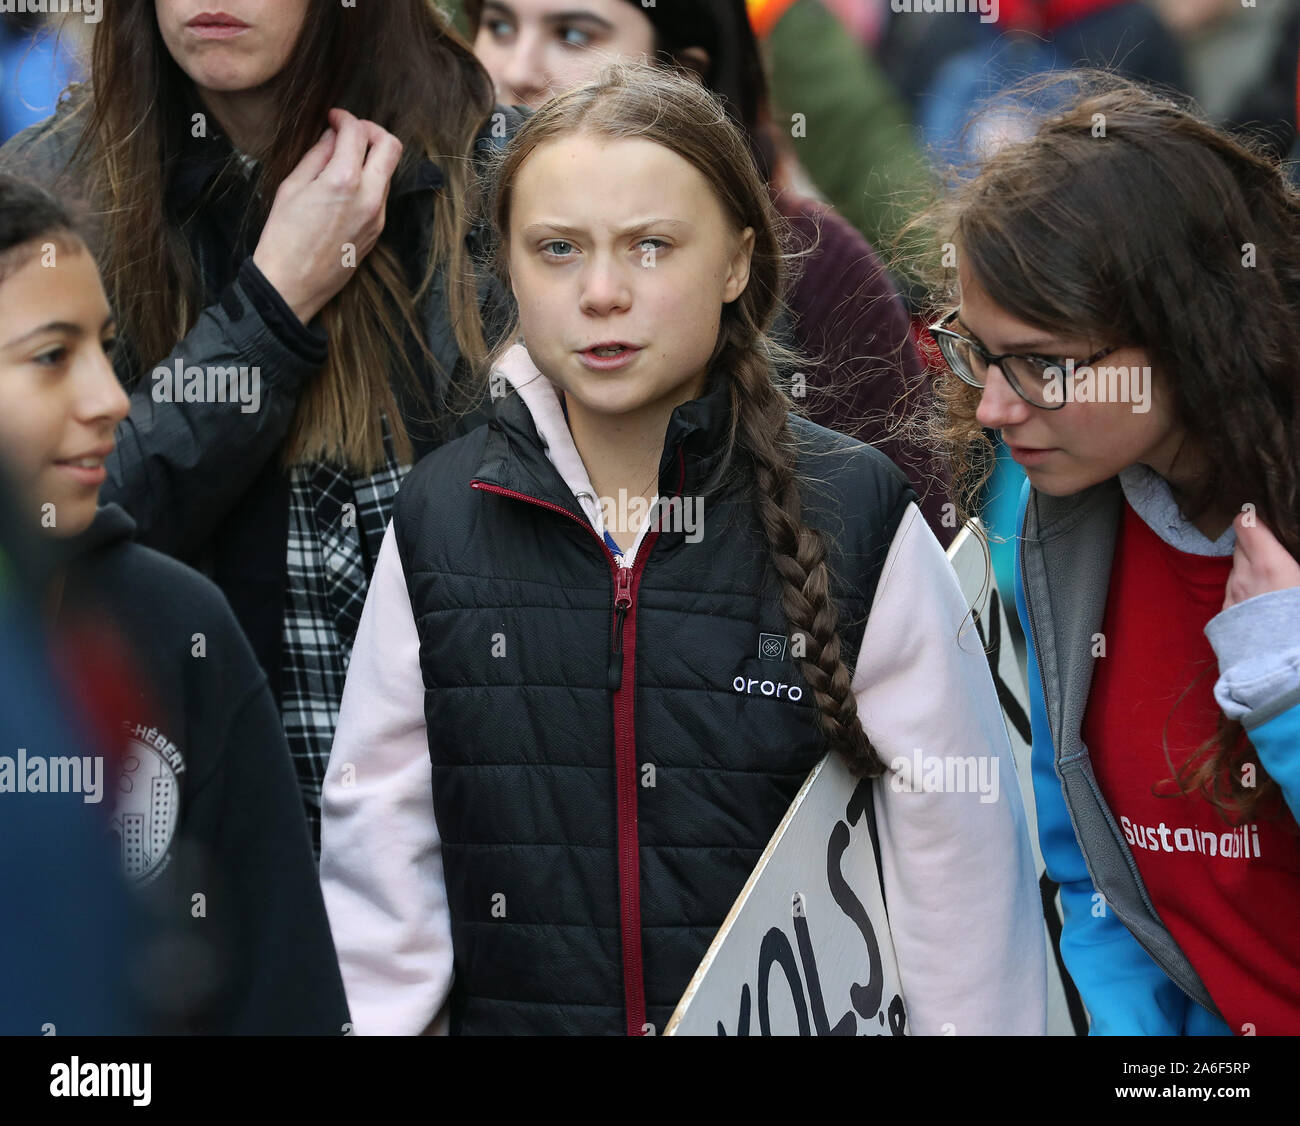 Vancouver, British Columbia, Canada, 25th October 2019. Swedish teen activist Greta Thunberg arrives for the post federal election Friday climate strike march starting and ending at the Vancouver Art Gallery in Vancouver, British Columbia on Friday, October 25, 2019. Organized by local youth-led, Sustainabiliteens, Greta and a turn out of nearly 10,000 climate activists demand action from industry and the various levels of government and are supporting the 15-youth who announced their plans to sue the federal government alleging it has contributed to climate change. Photo by Heinz Ruckemann/UP Stock Photo